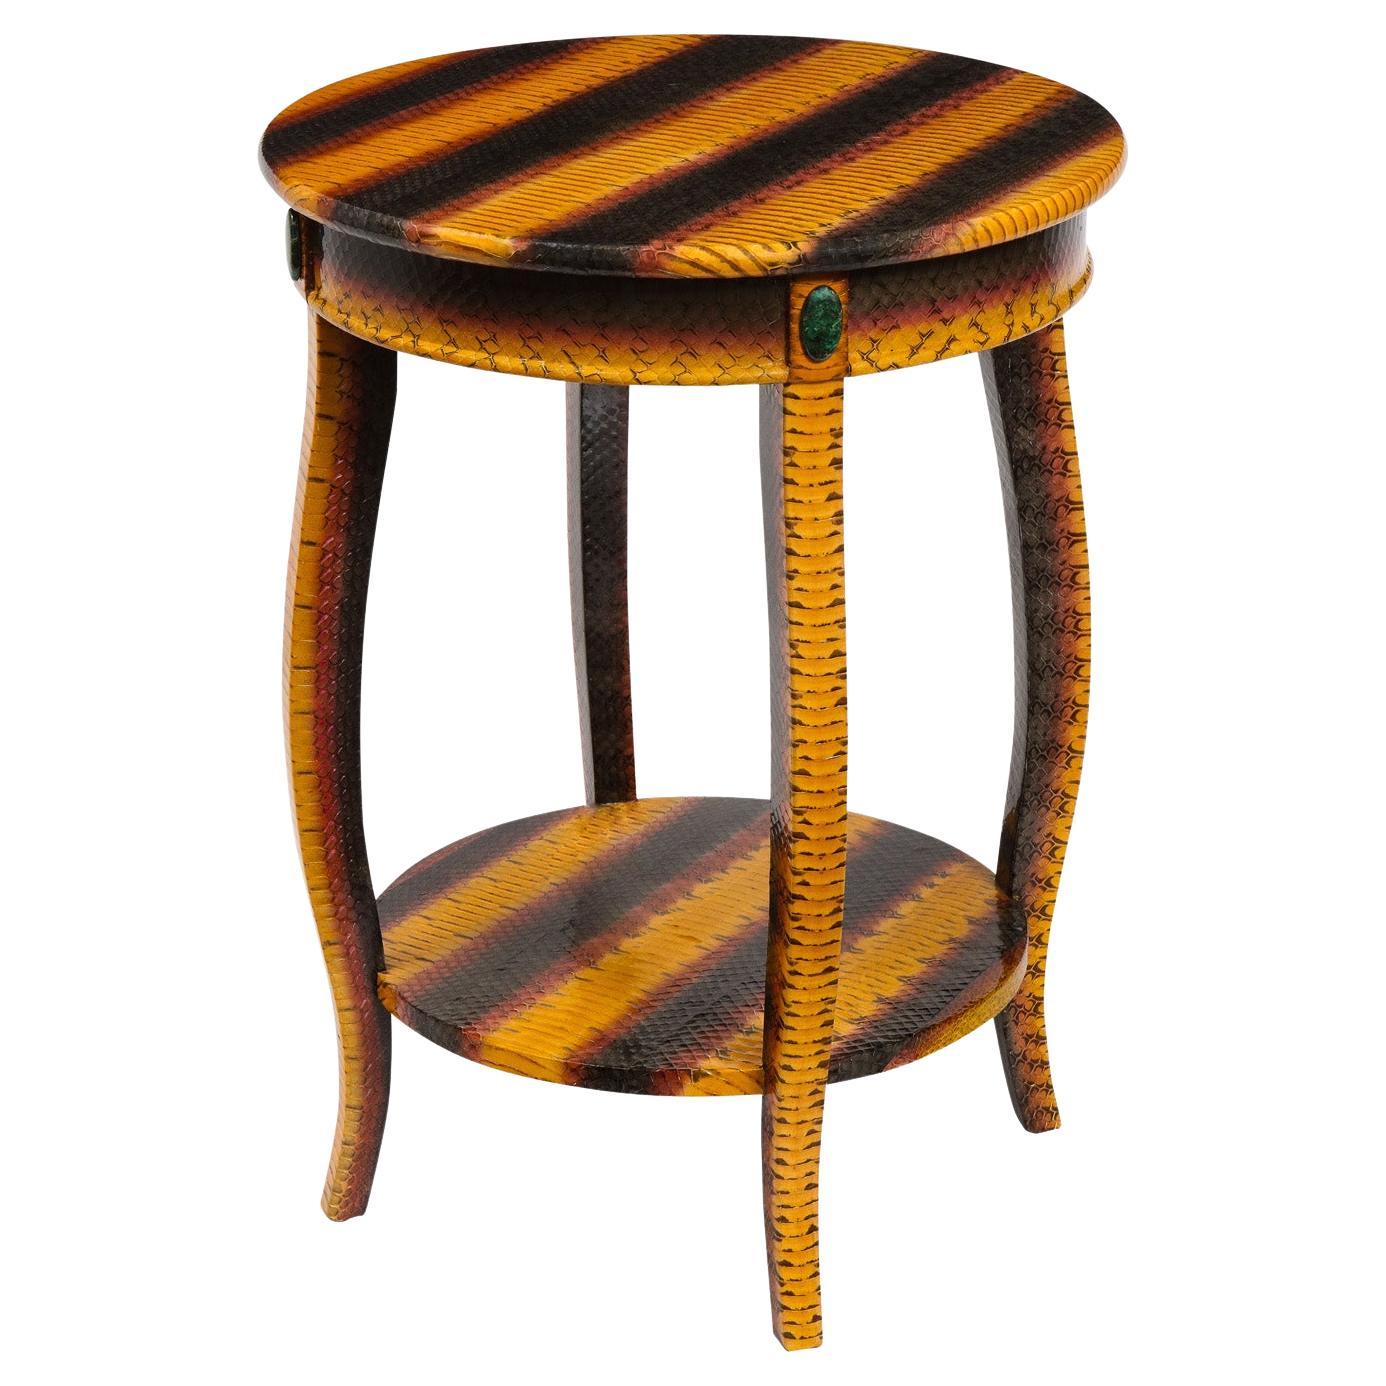 Lobel Originals 2-Tier Side Table in Snake Skin and Malachite 2022 'Signed'